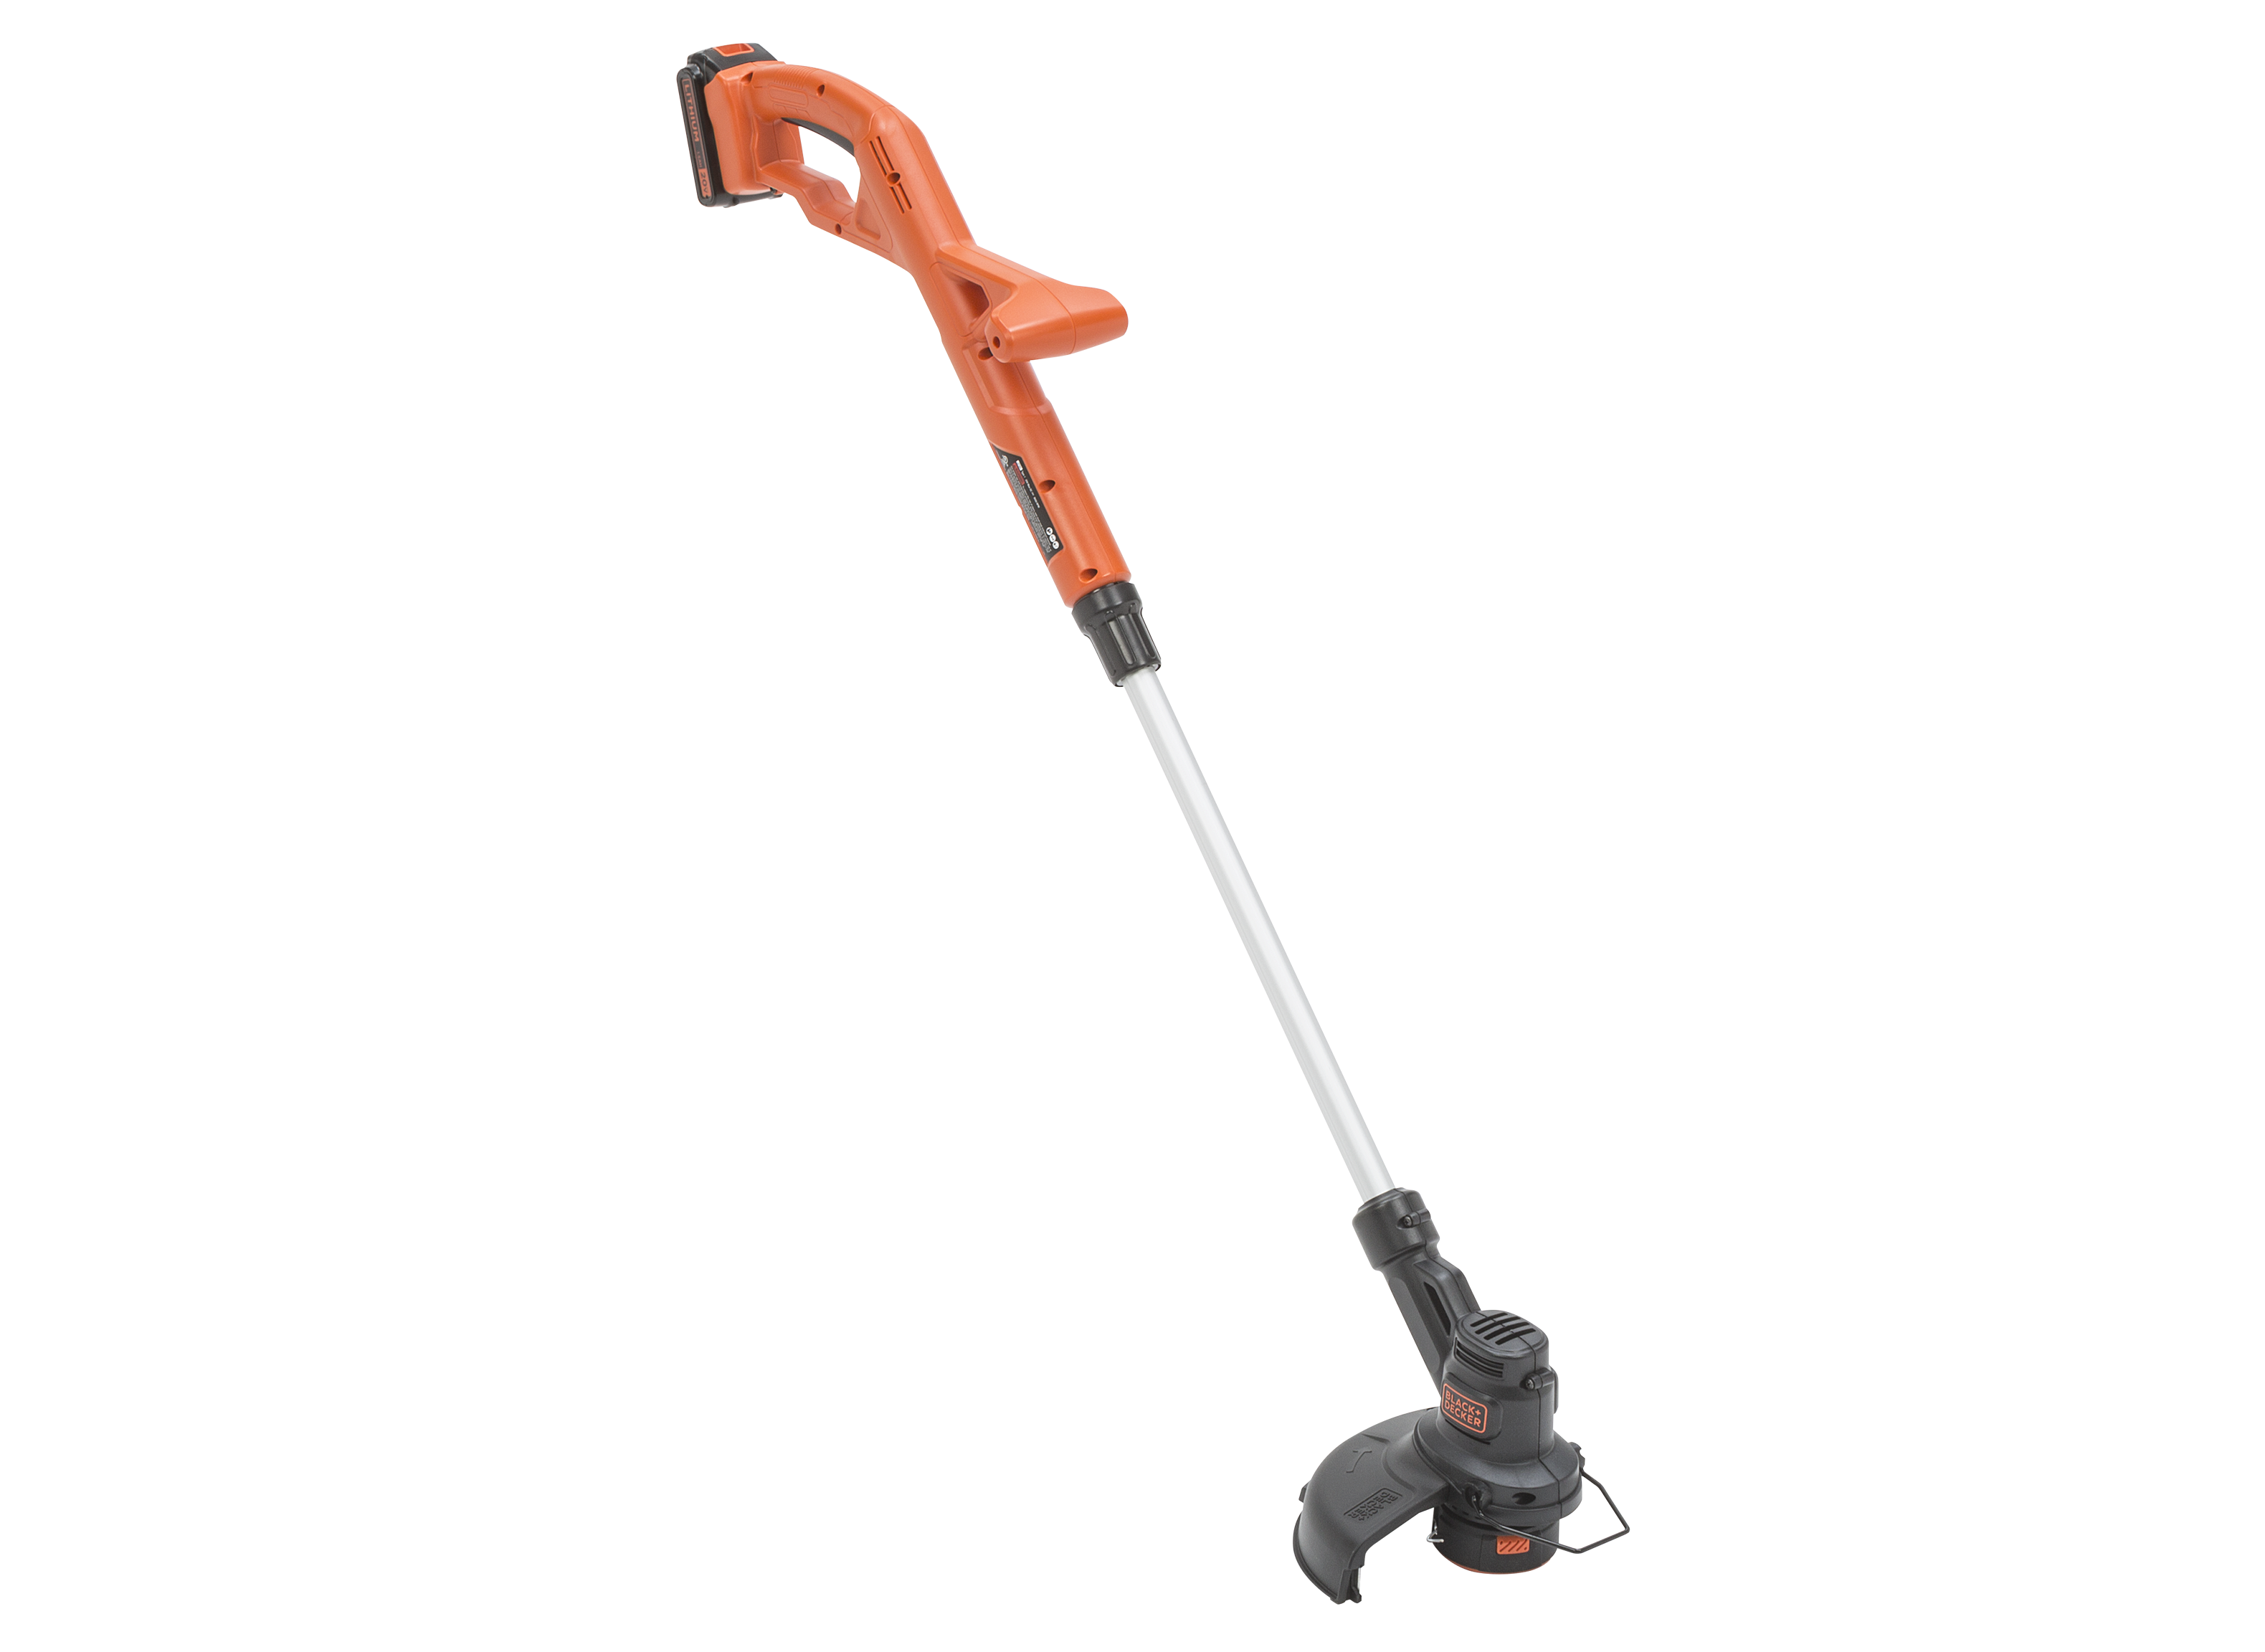 https://crdms.images.consumerreports.org/prod/products/cr/models/386782-stringtrimmers-blackdecker-lst201.png